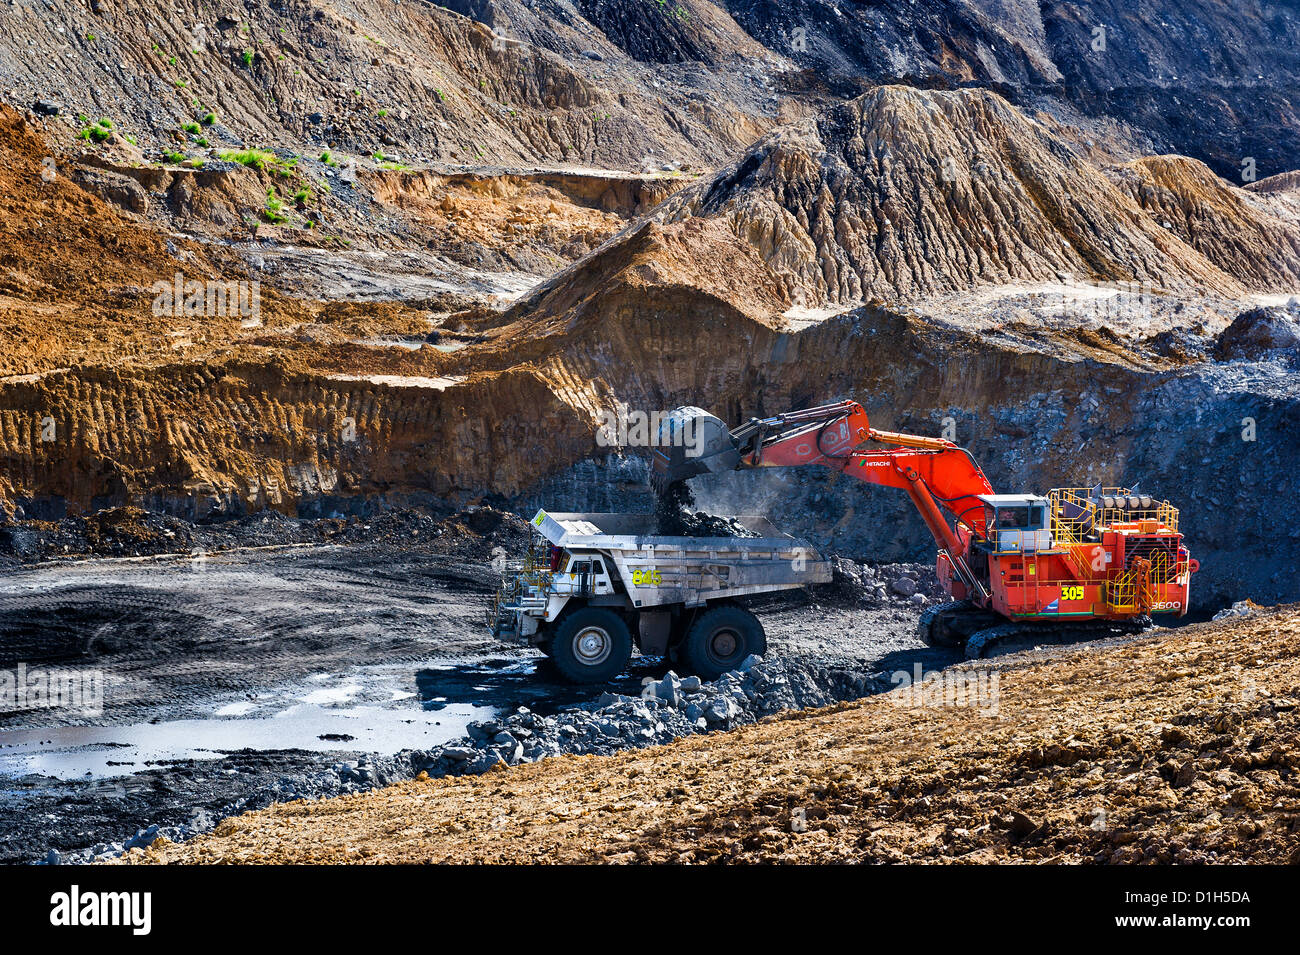 Australian Coal Mining High Resolution Stock Photography and Images - Alamy